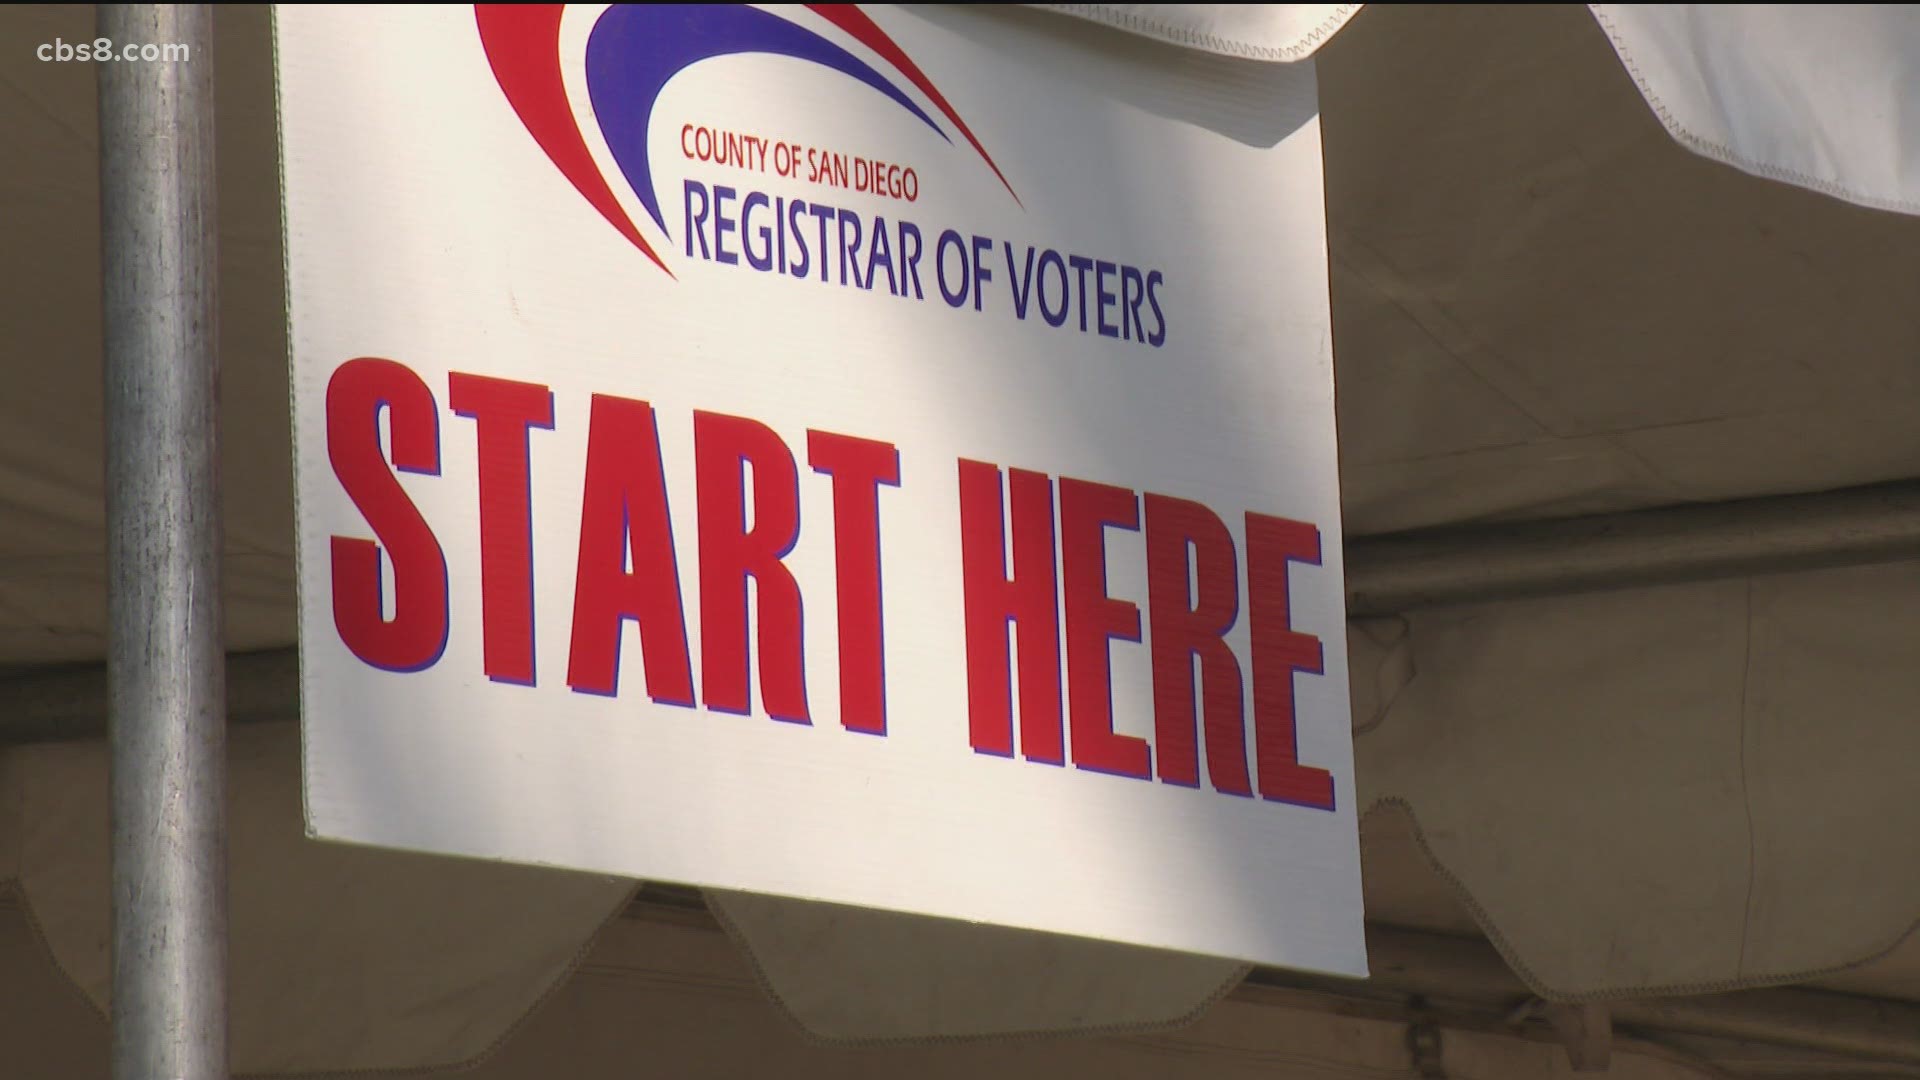 People will be able to vote at the Registrar in Kearny Mesa and any polling location in the county without a mask.